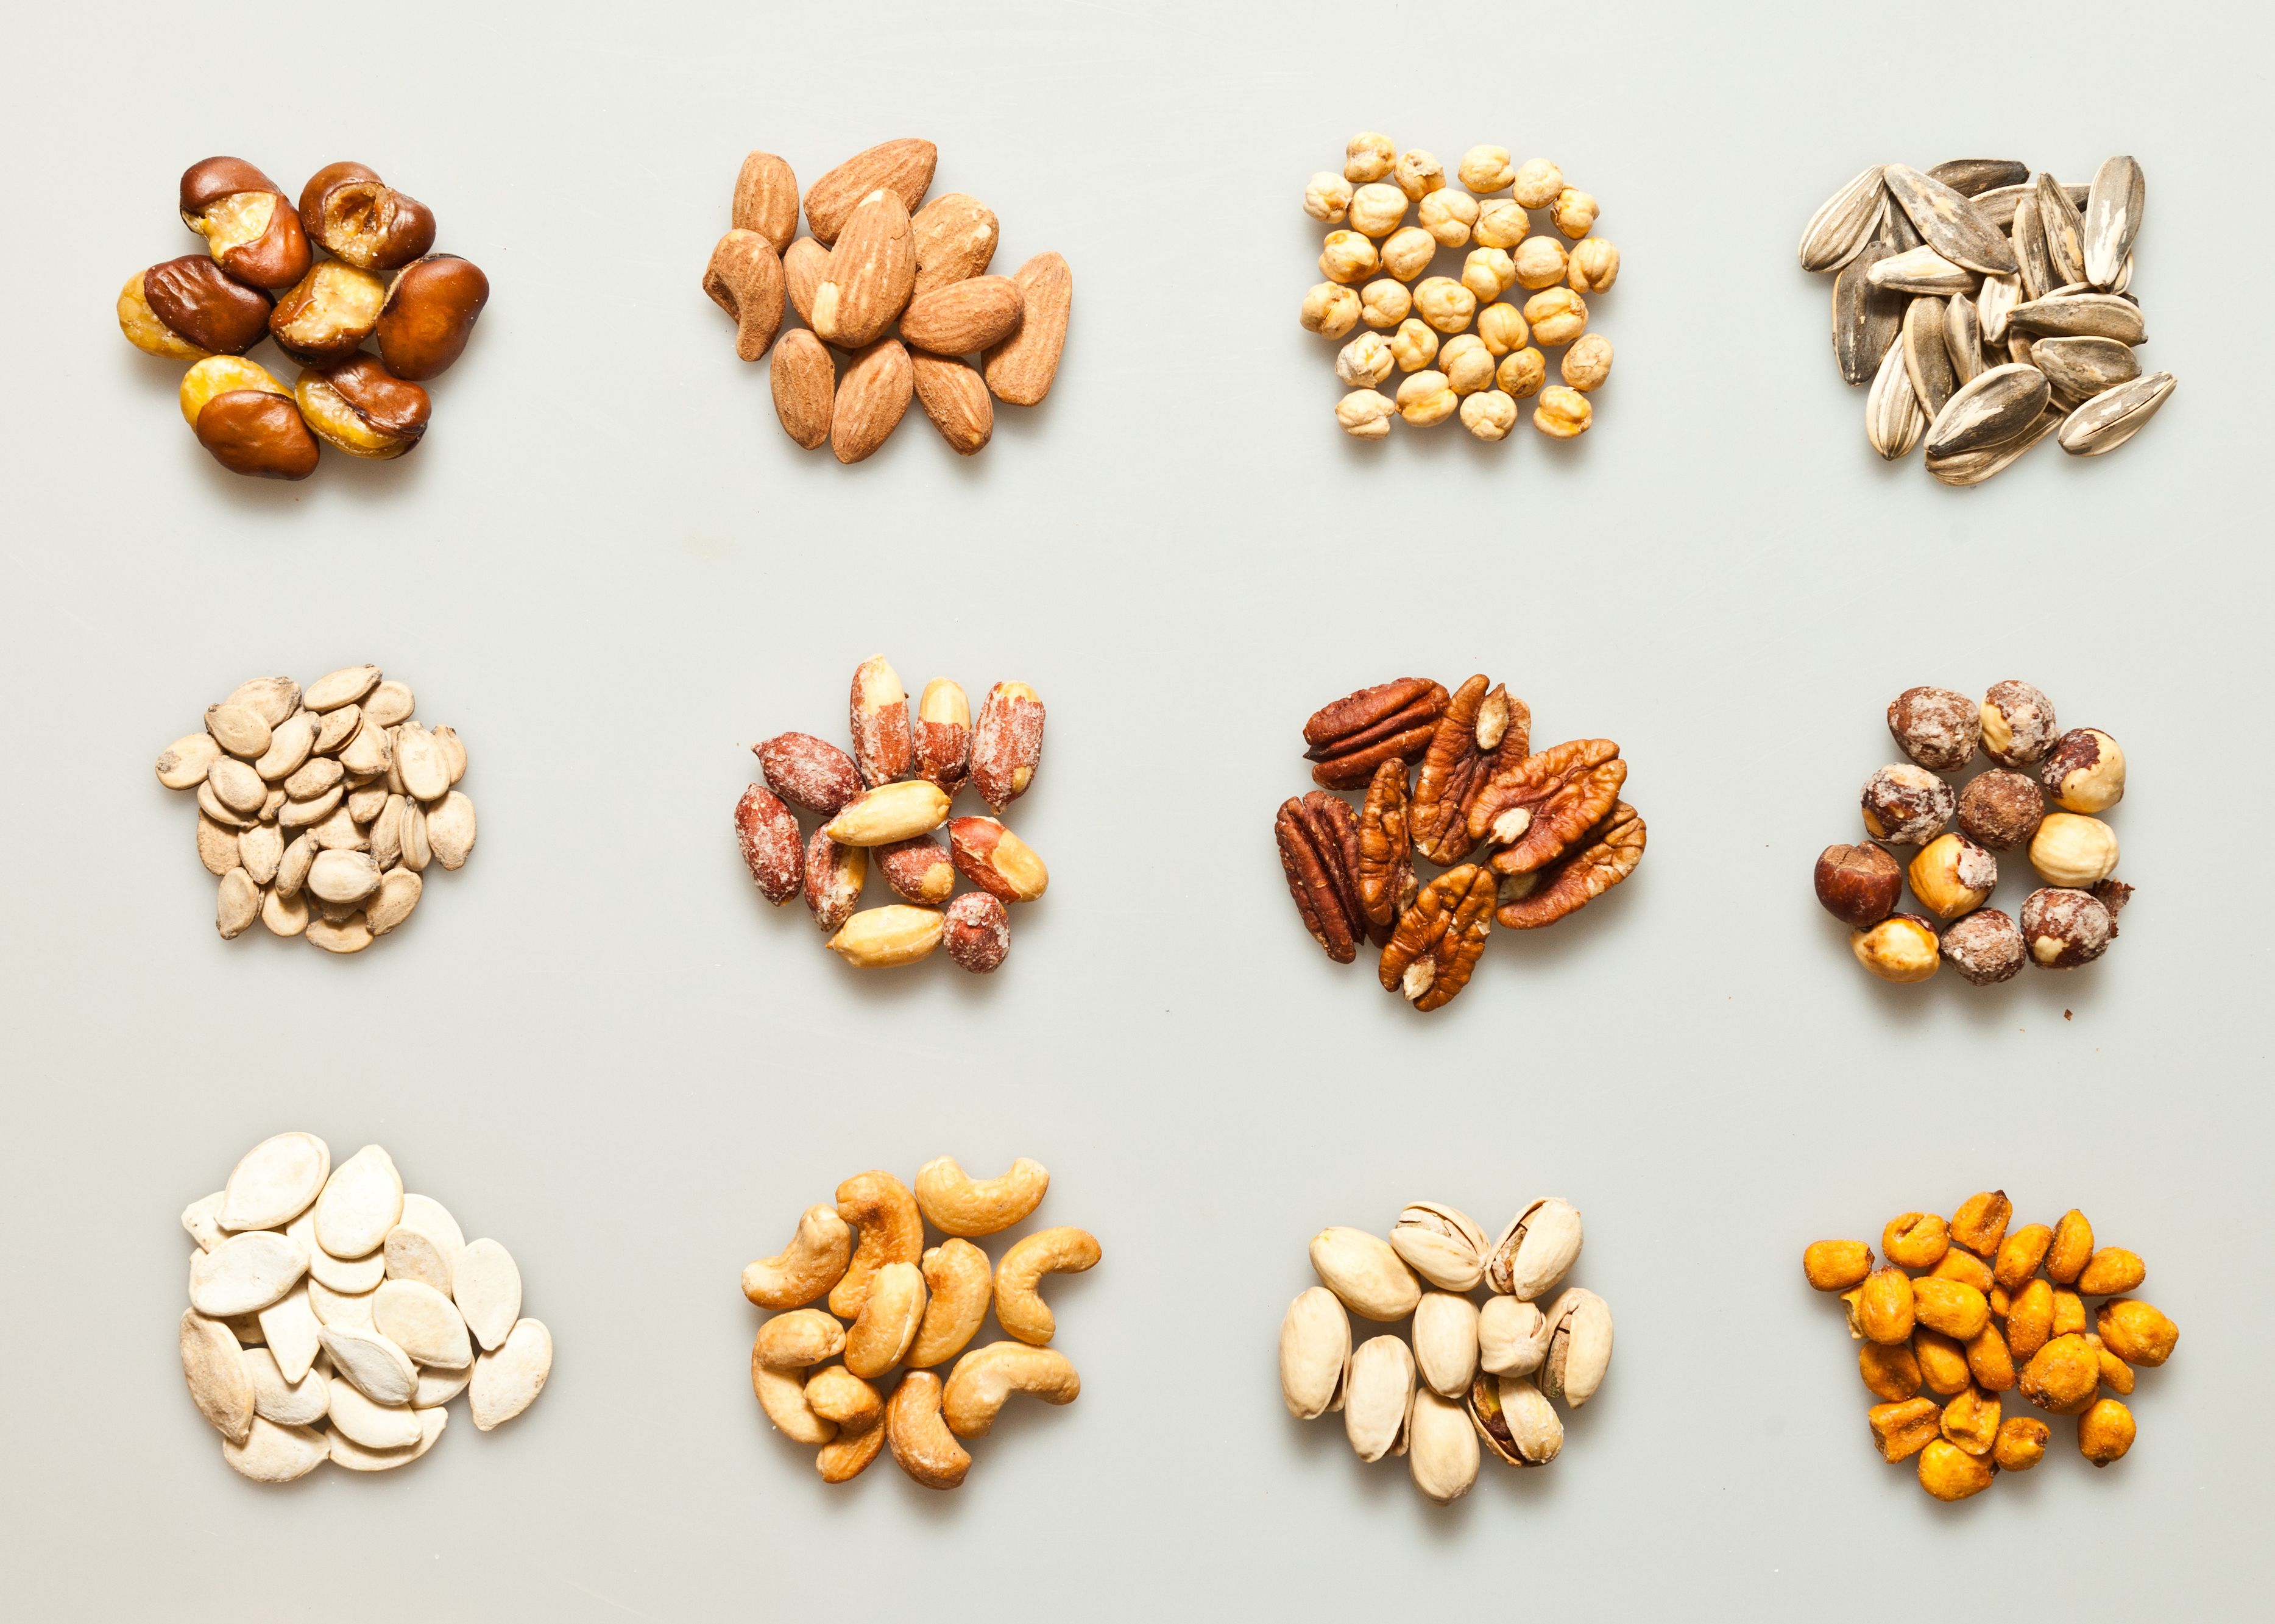 The 10 Healthiest Nuts To According to